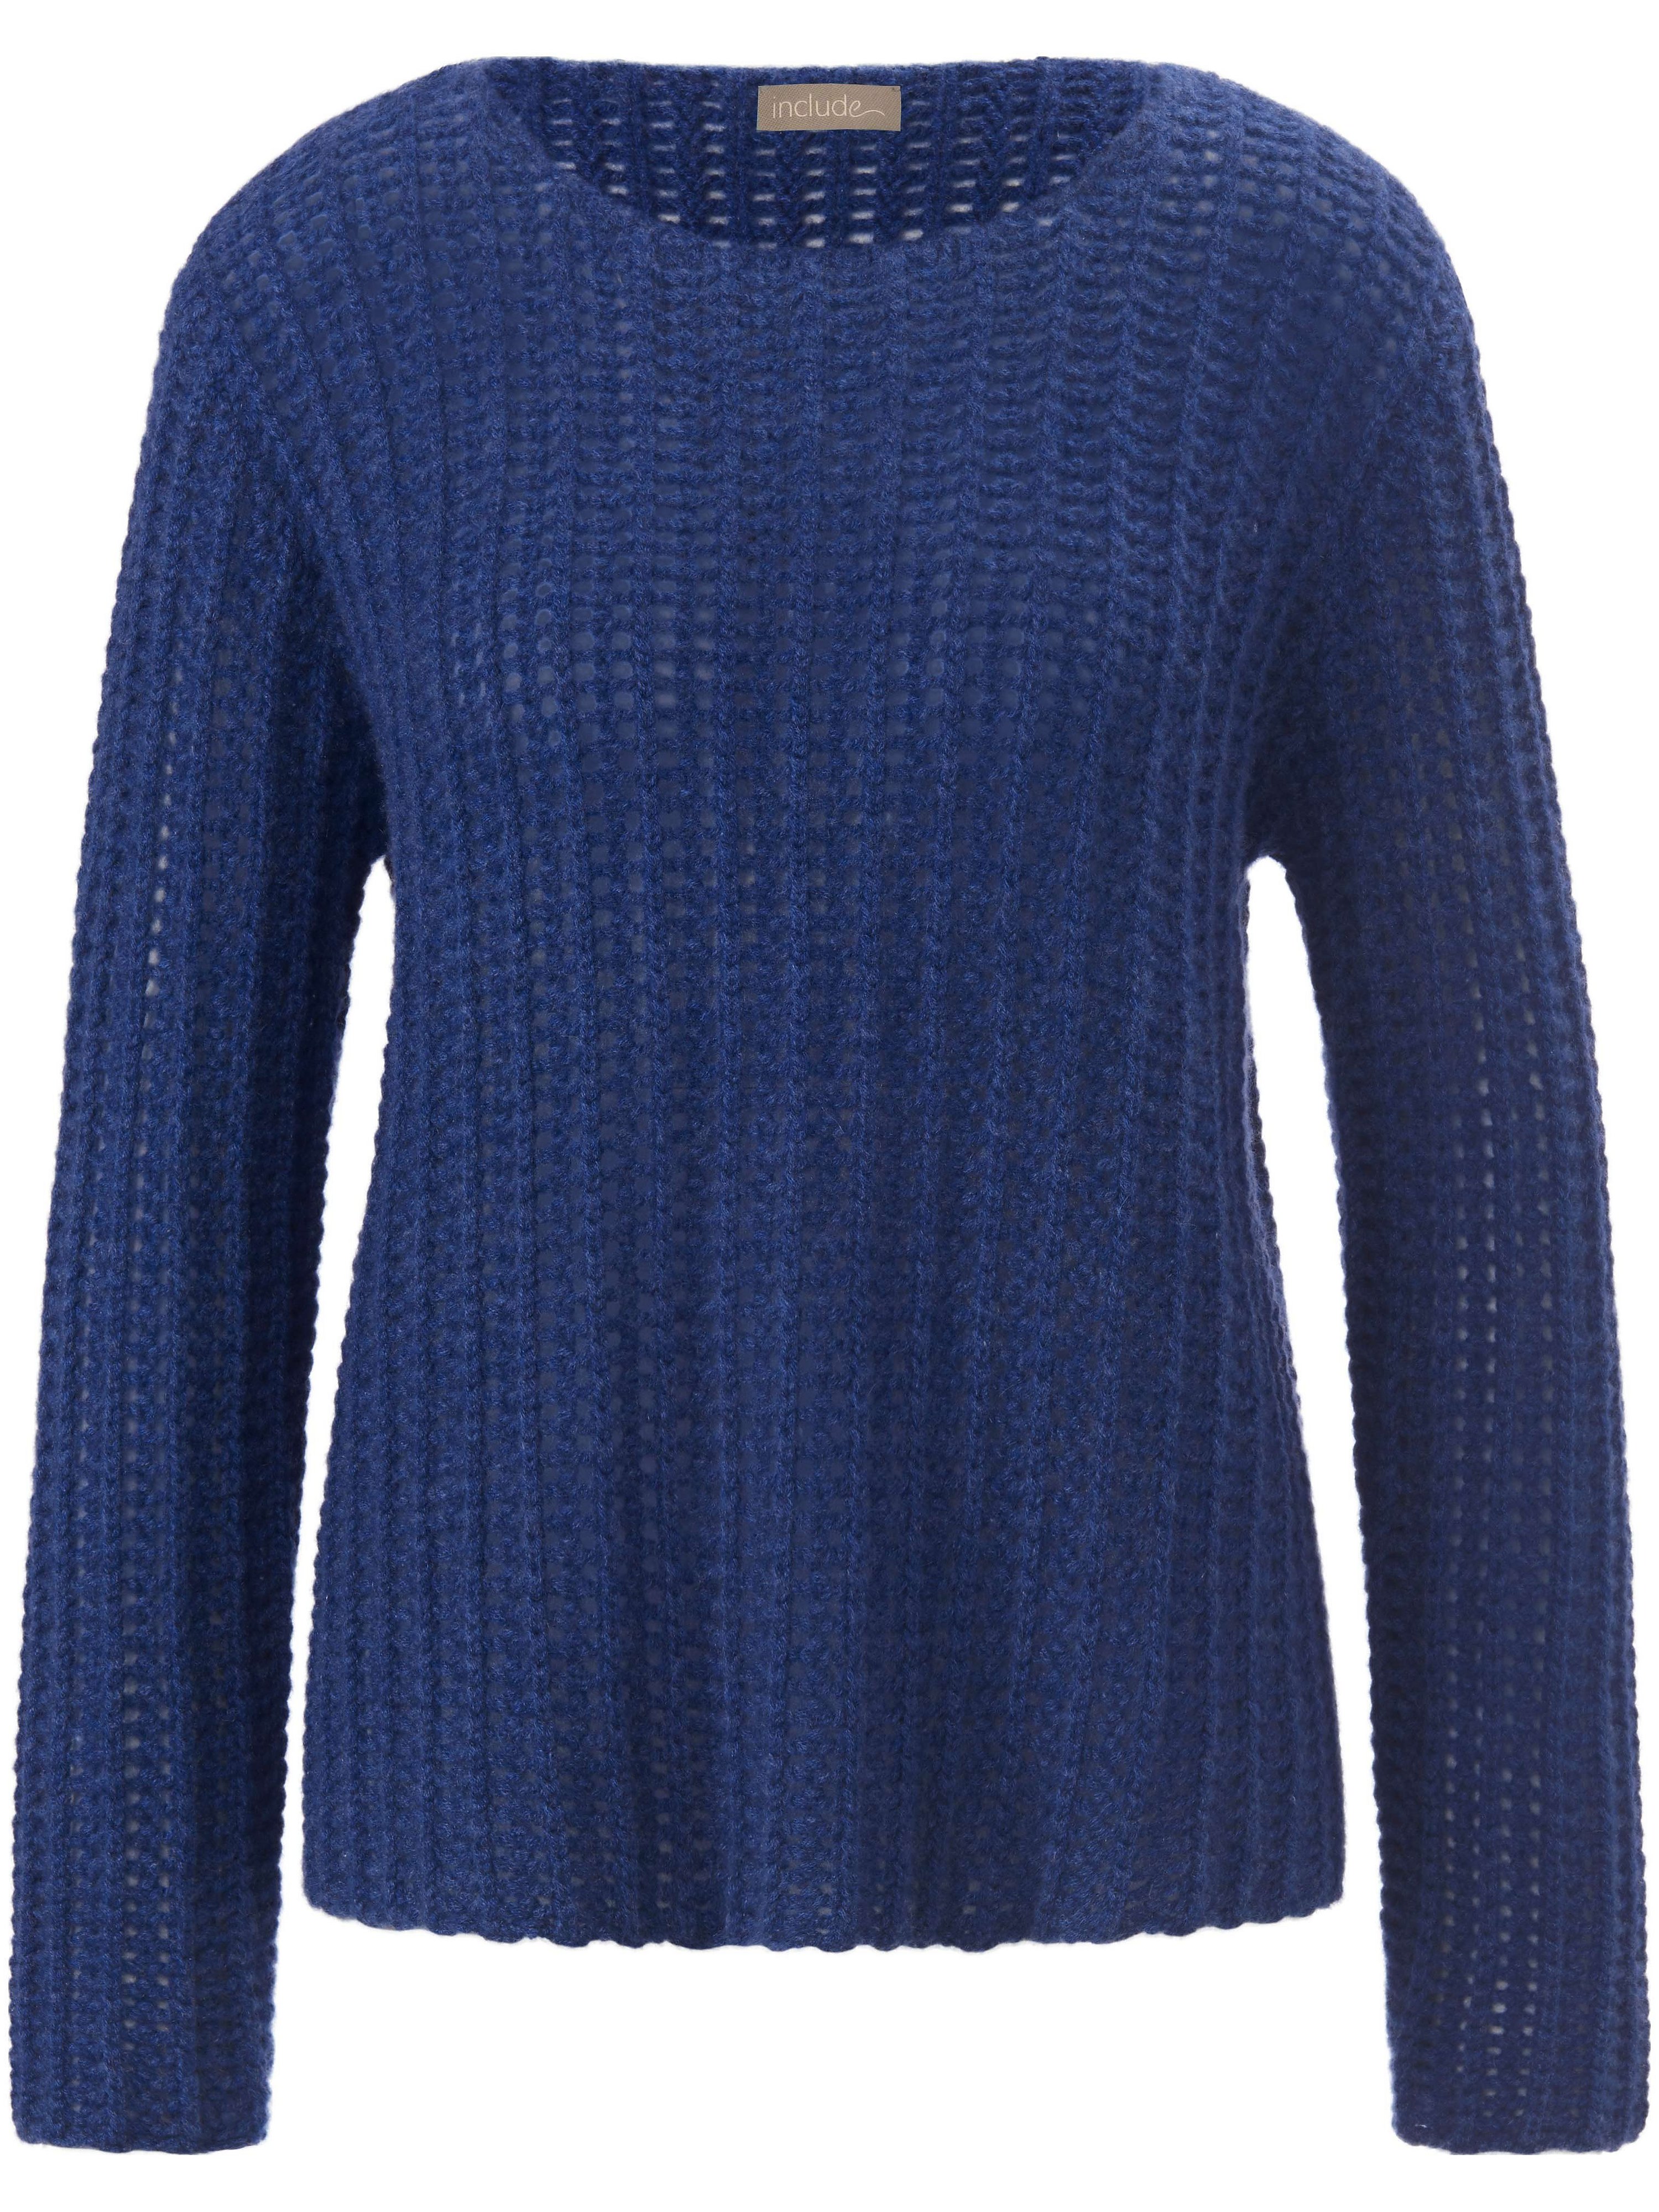 Le pull 100% cachemire  include bleu taille 44